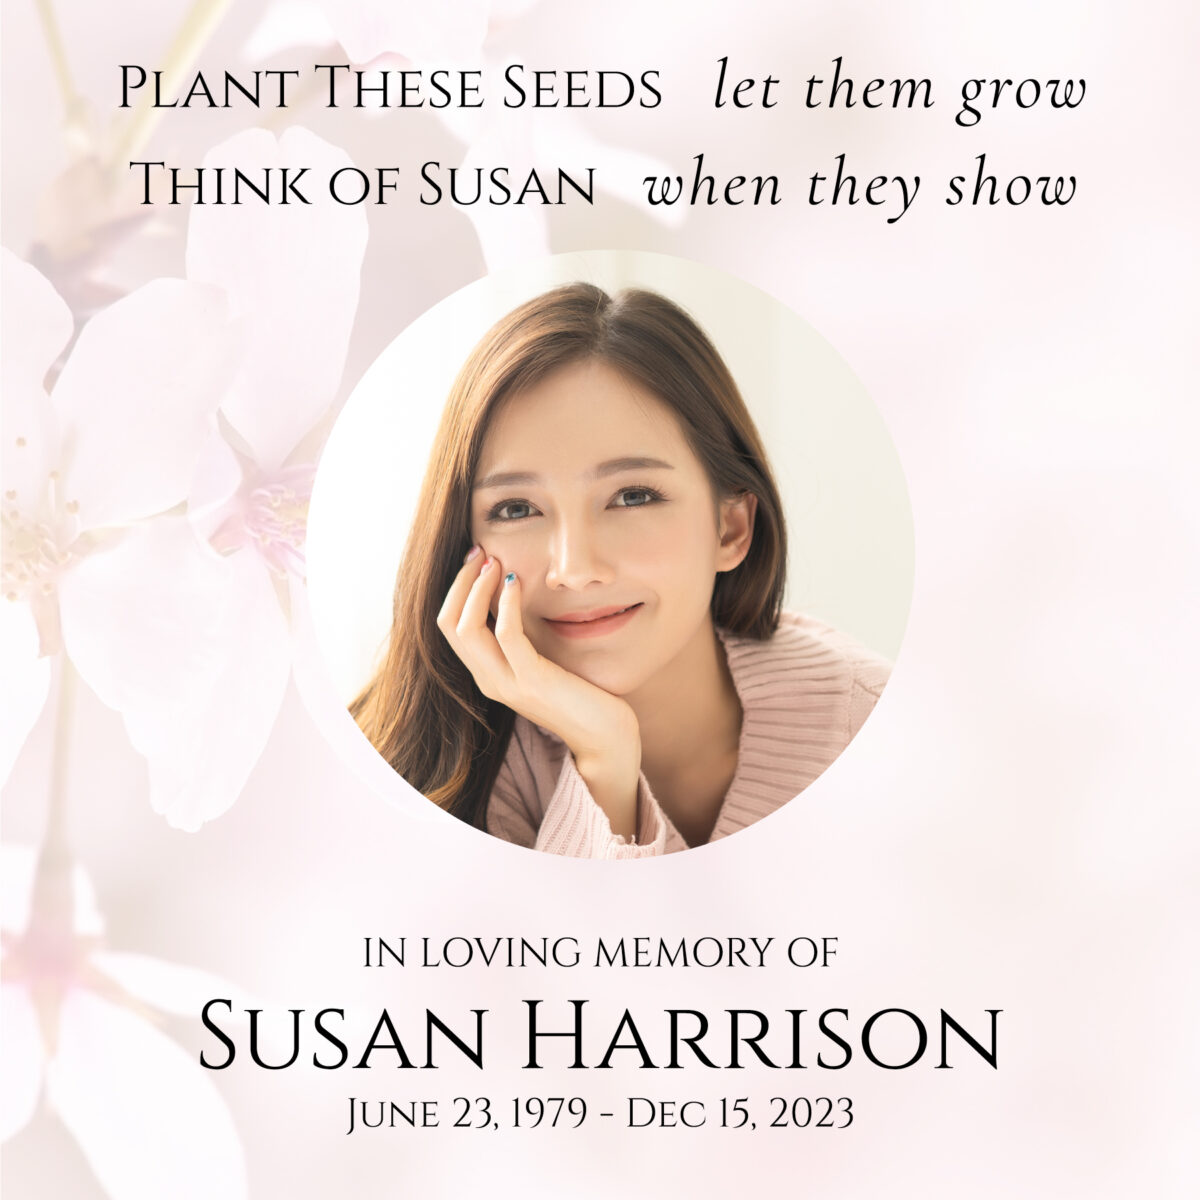 Memorial Seed Packets